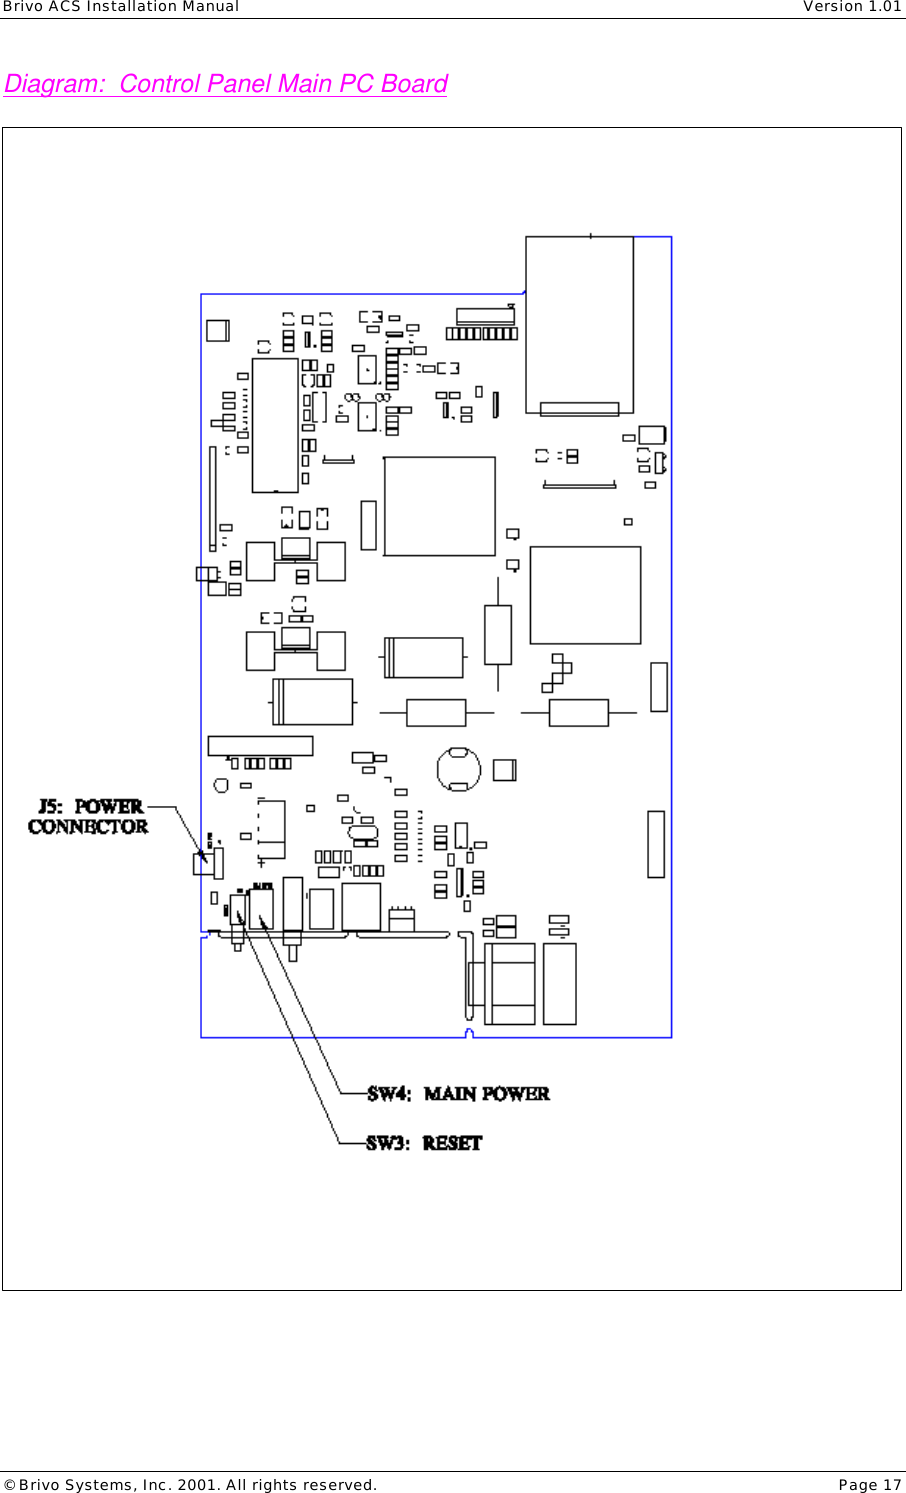 Brivo ACS Installation Manual    Version 1.01 © Brivo Systems, Inc. 2001. All rights reserved.    Page 17 Diagram:  Control Panel Main PC Board   